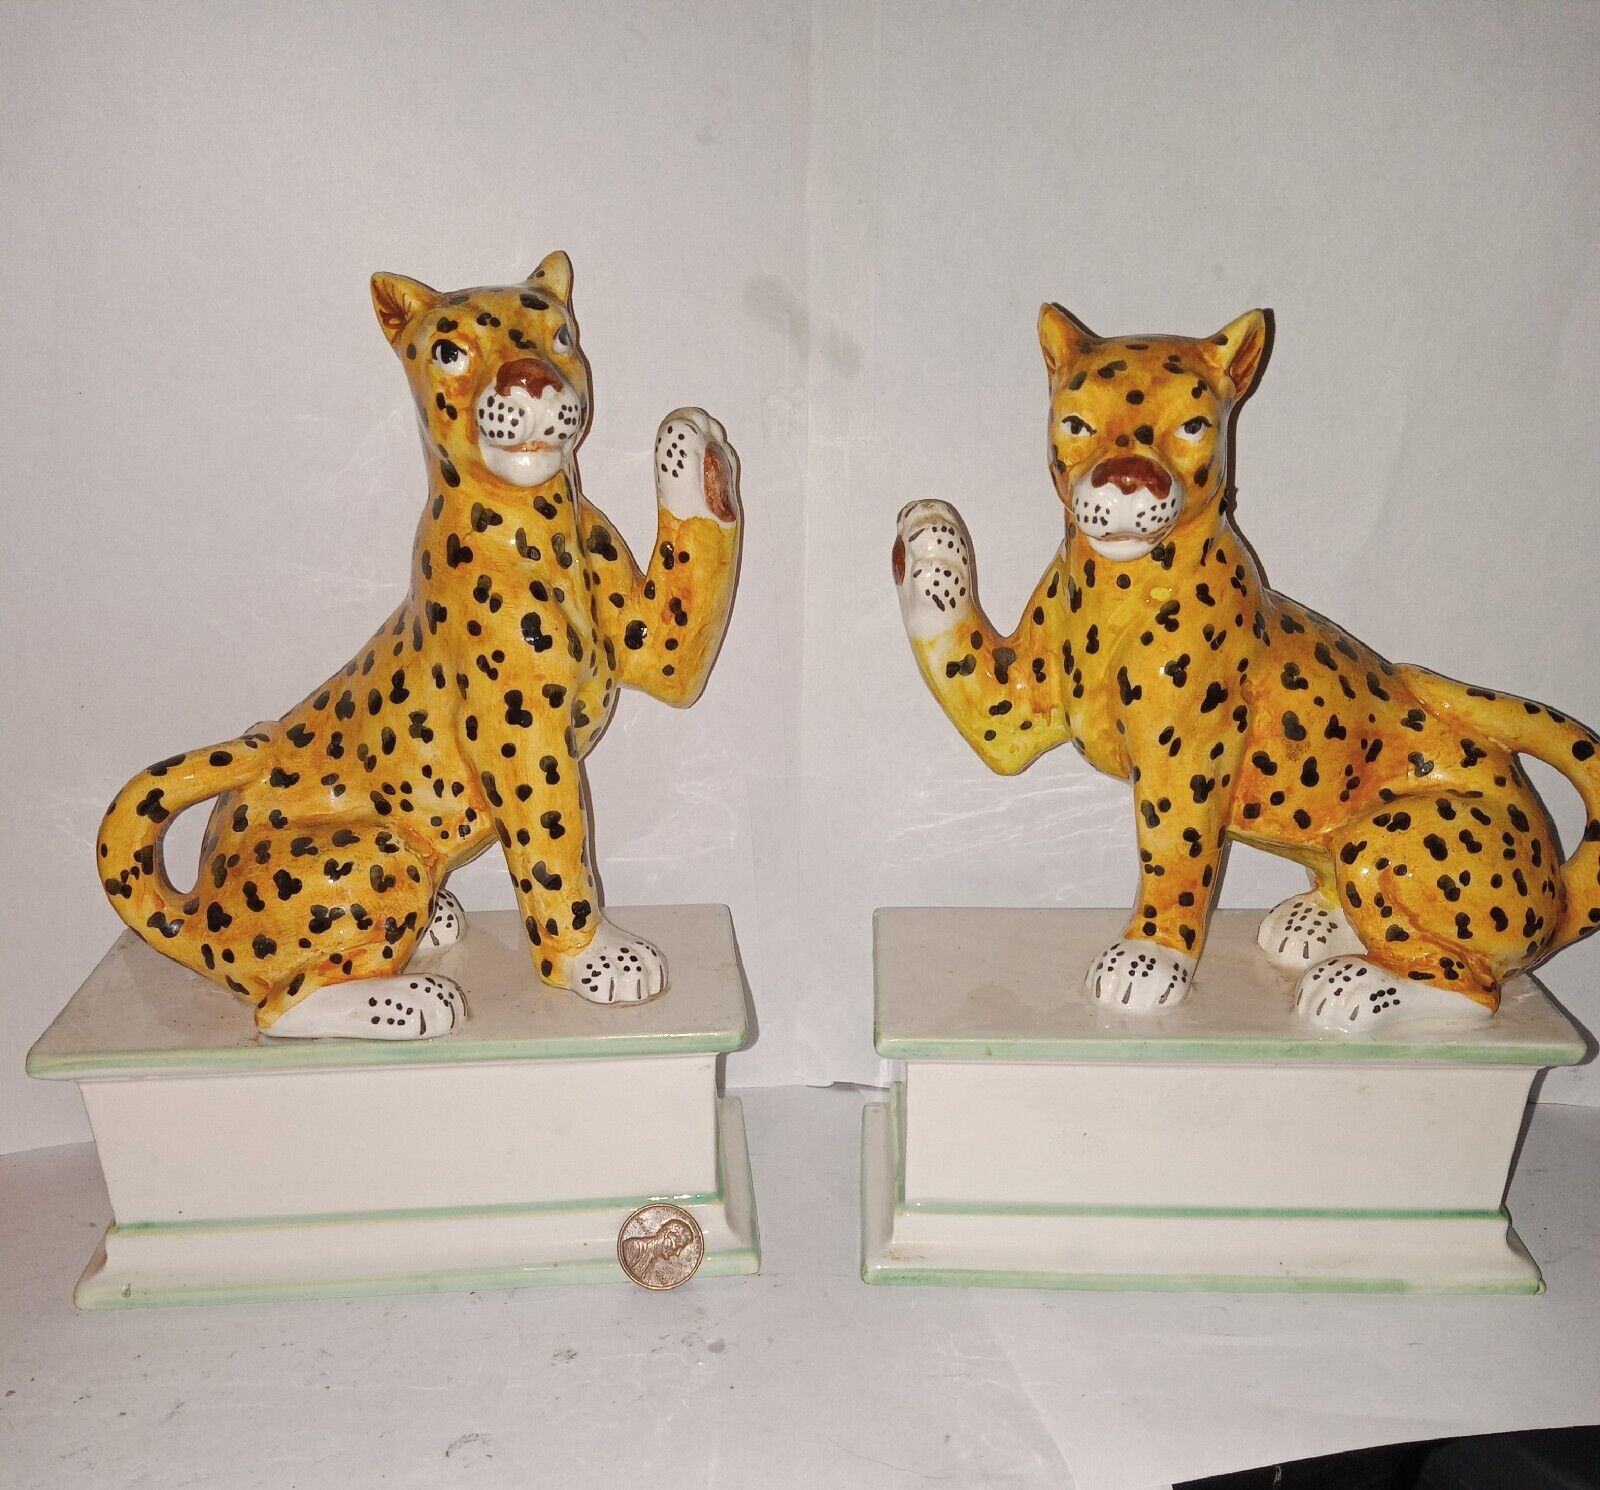 Vintage  RARE High End  Cheetah Sculptures/ Figures Signed Made in Italy  Gumps 